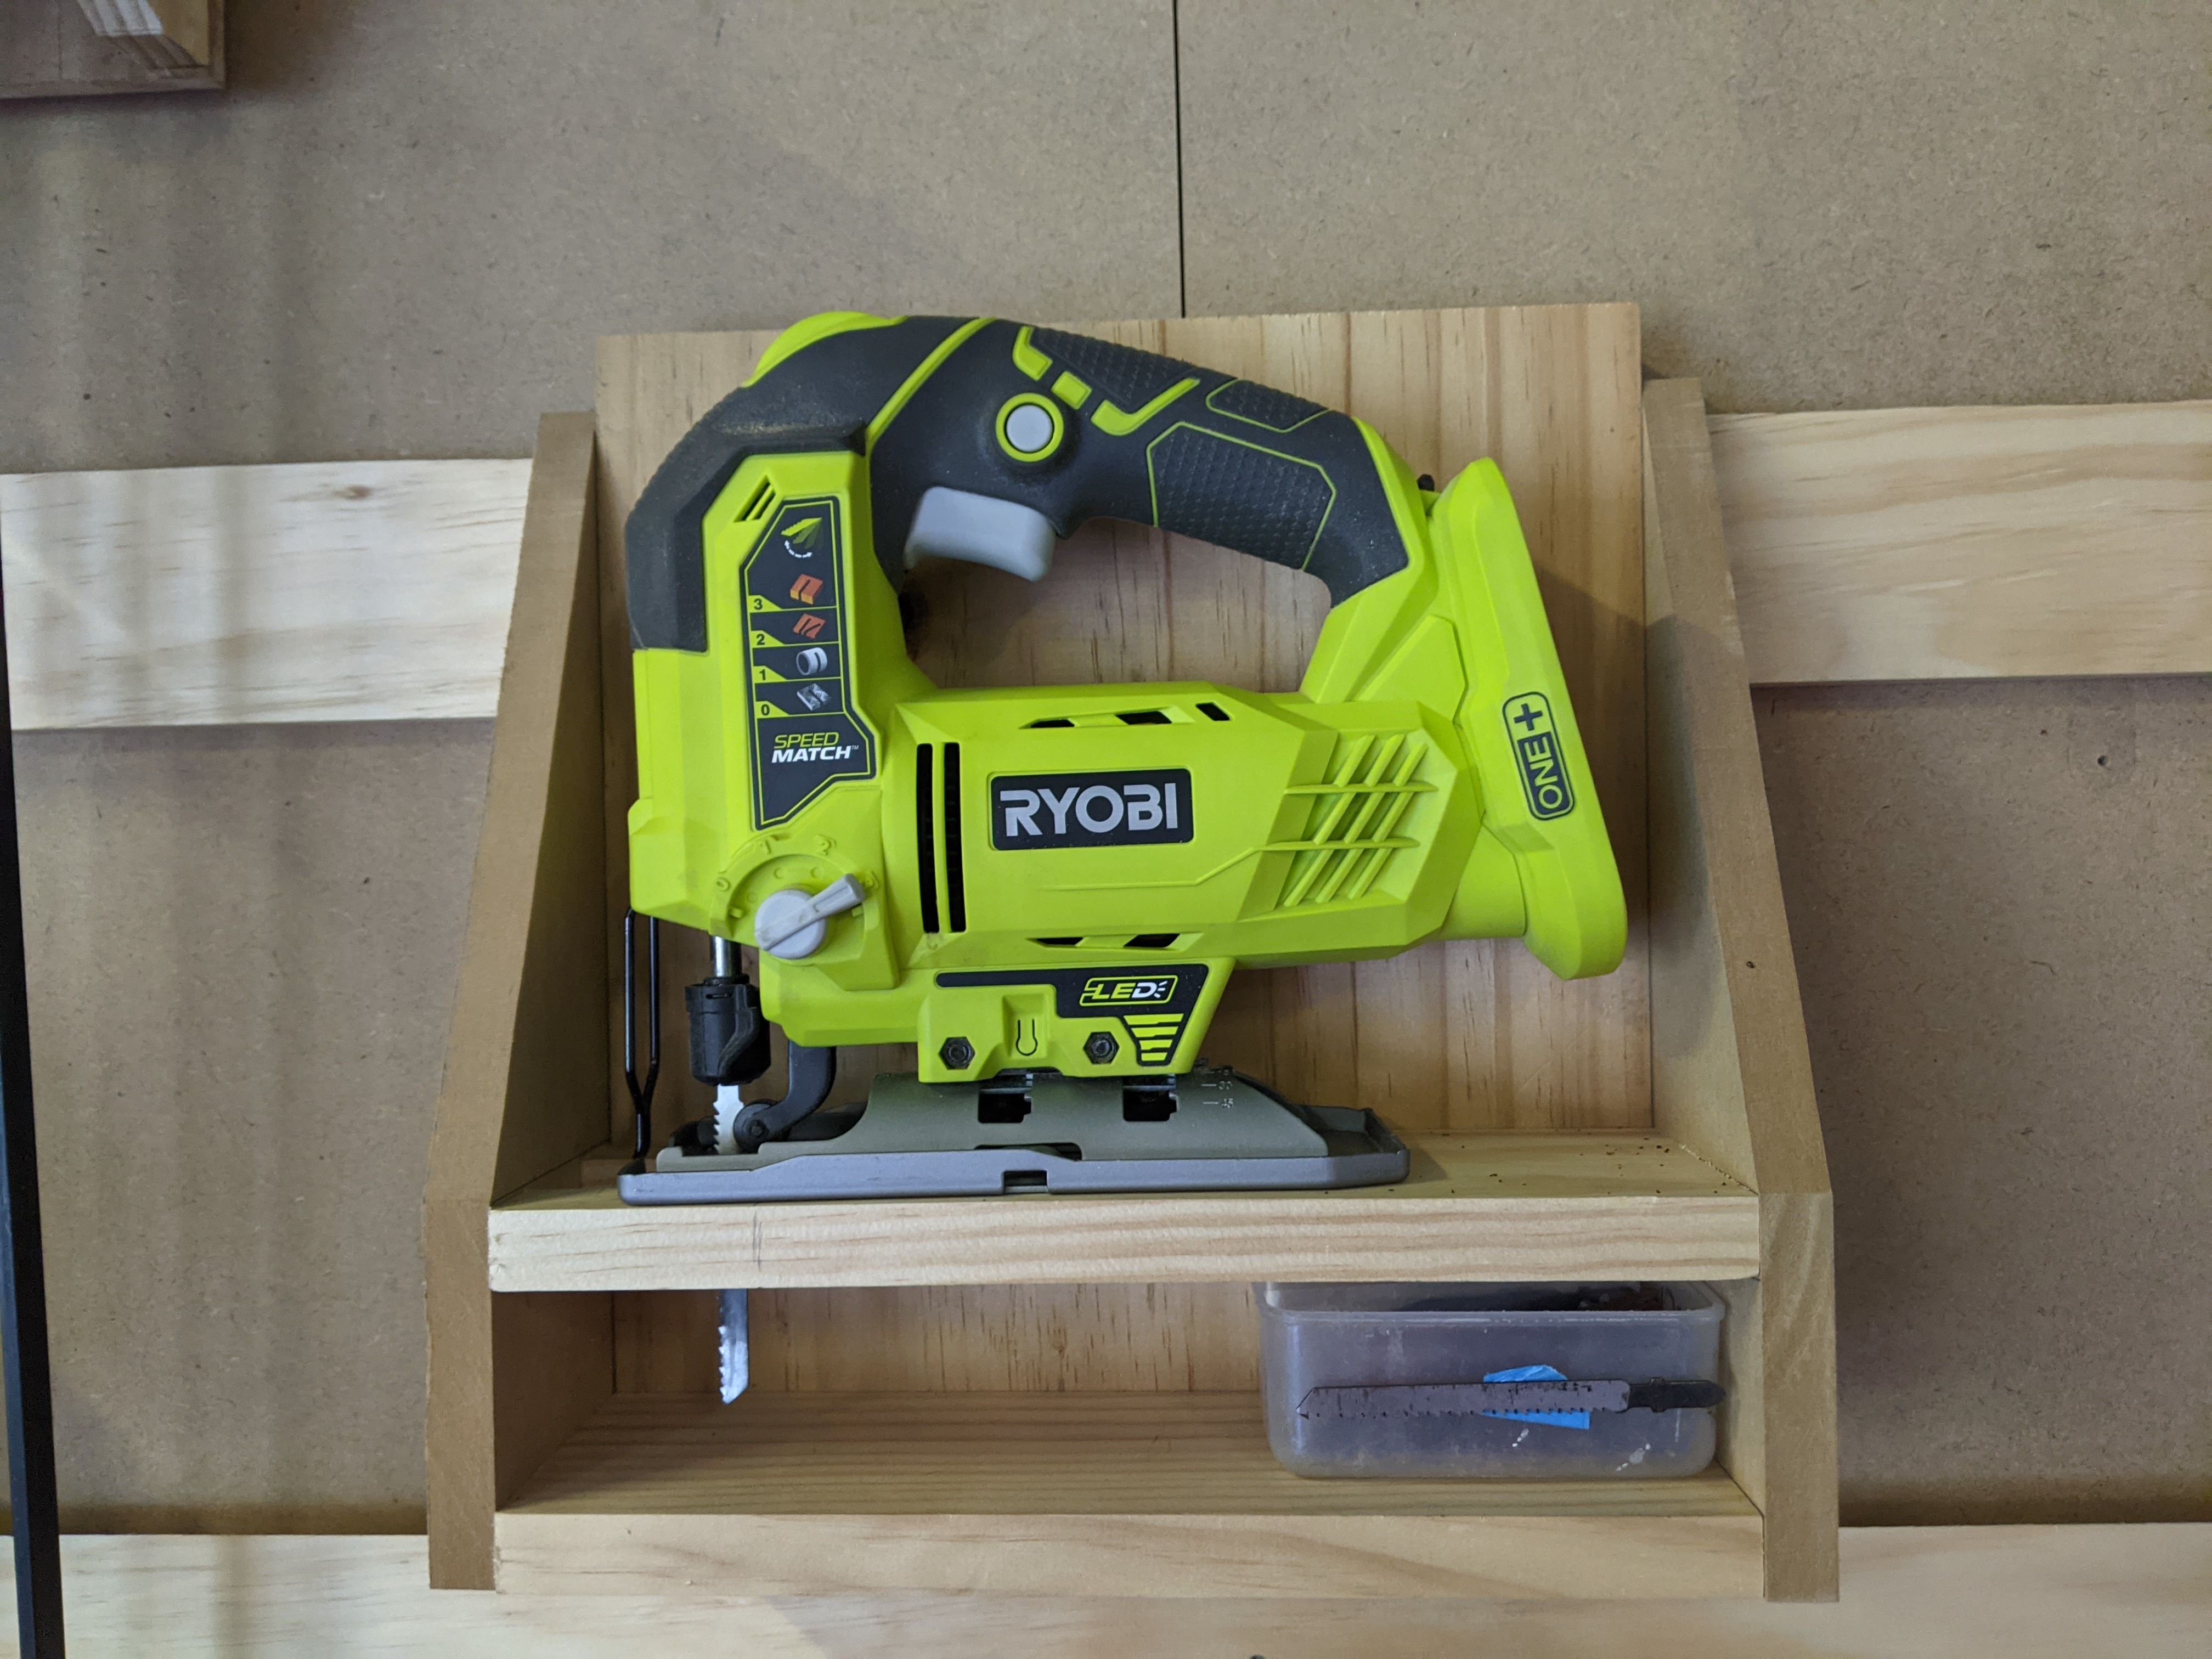 Ryobi power tool storage for the french cleat wall!